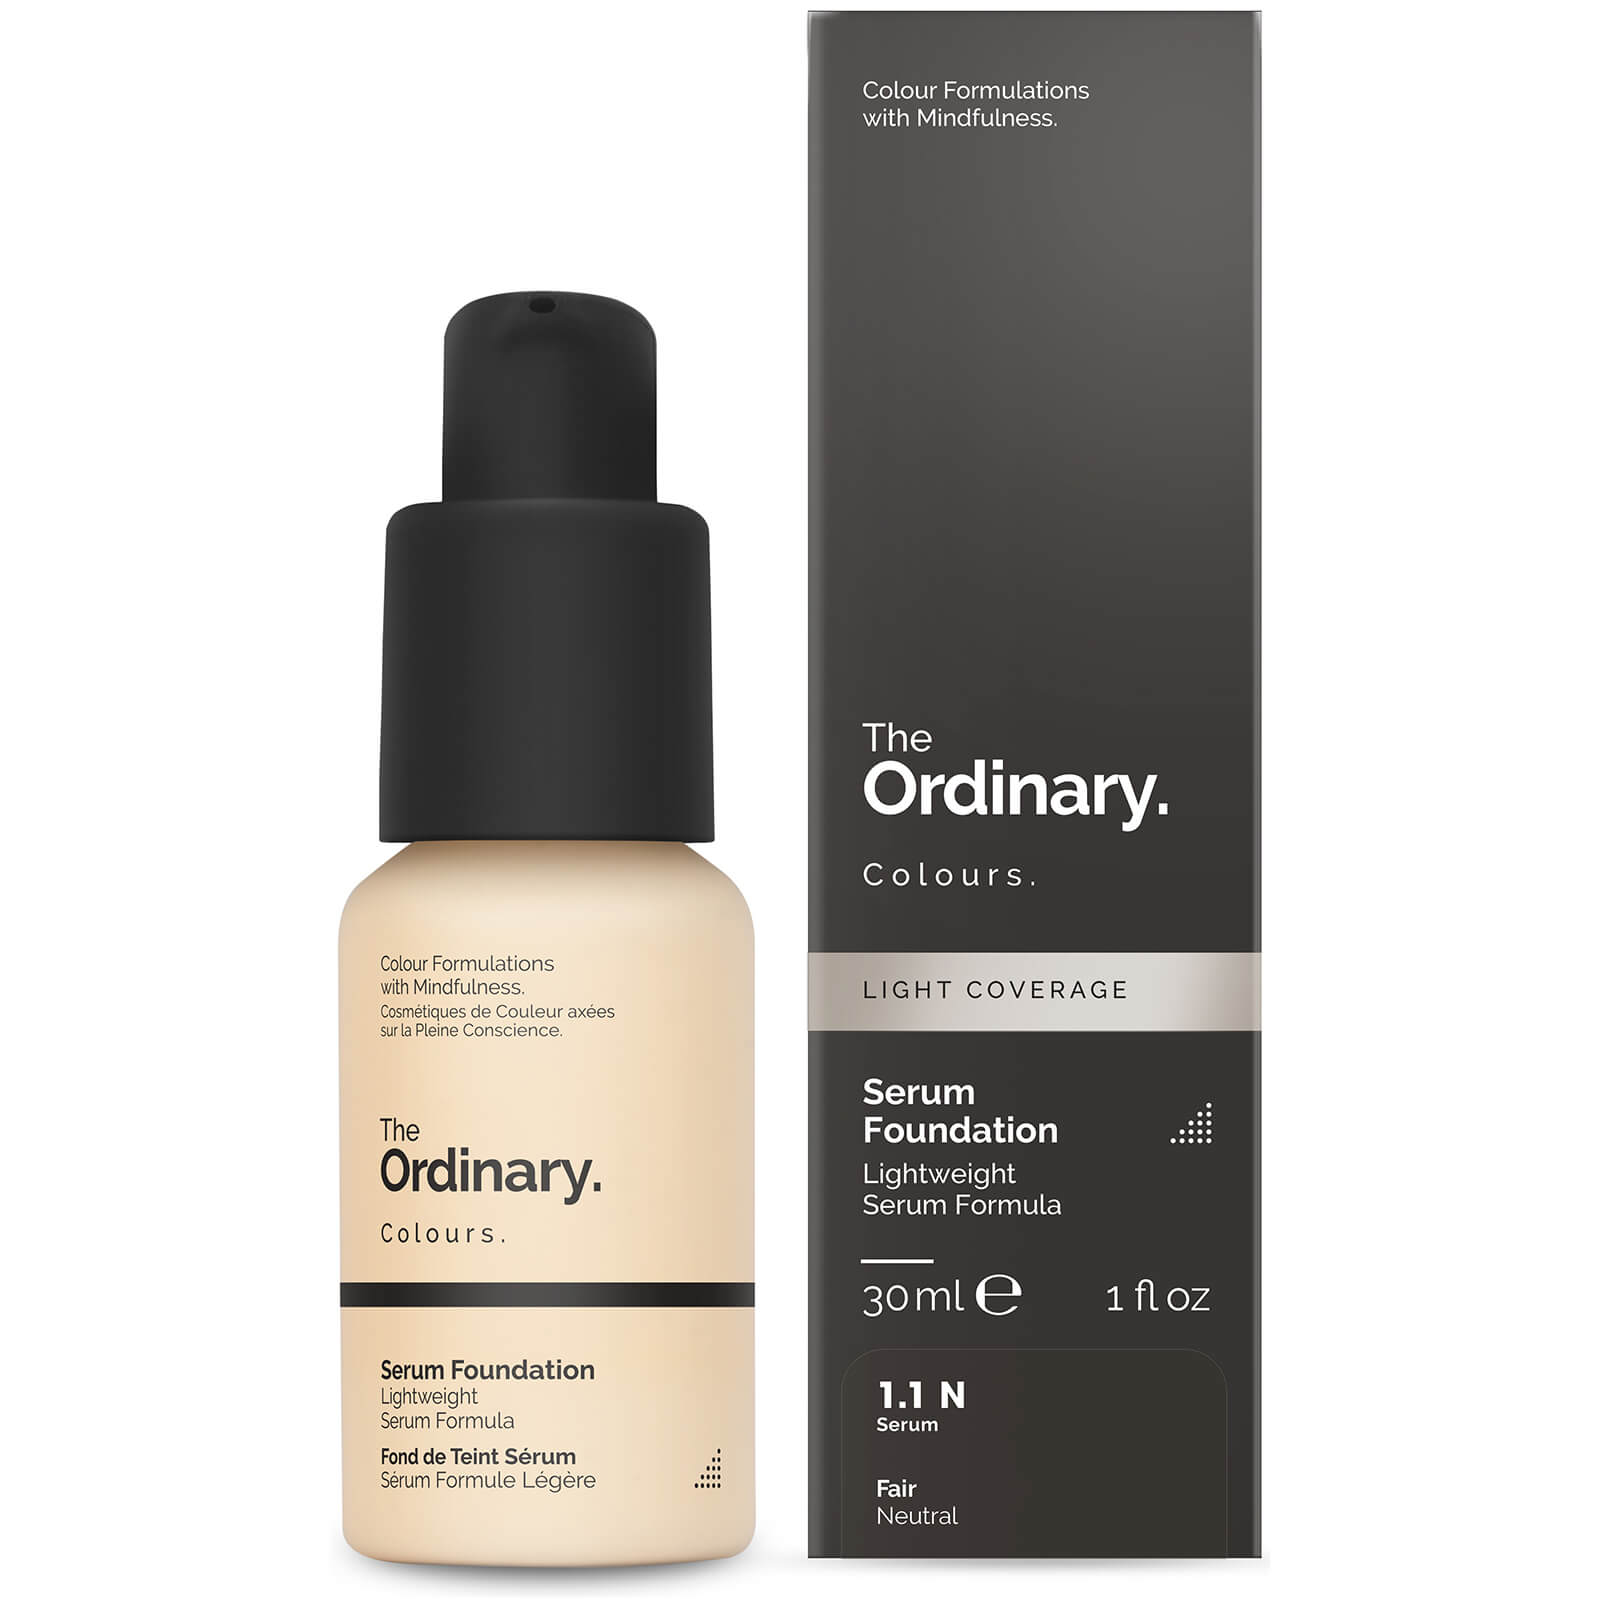 The Ordinary Serum Foundation with SPF 15 by The Ordinary Colours 30ml (Various Shades) - 1.1N